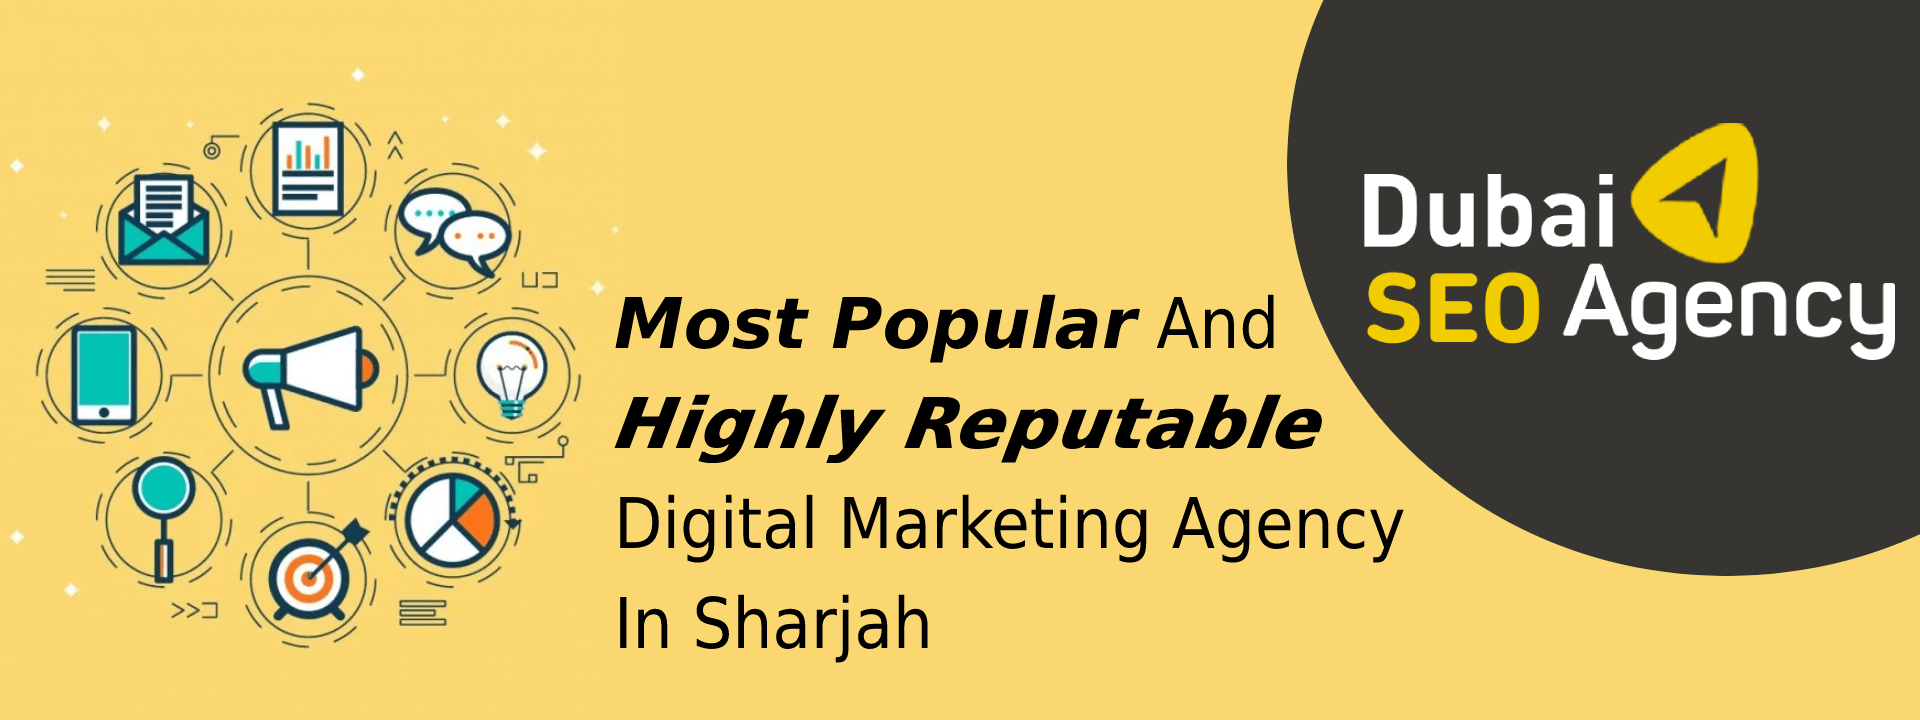 Most Popular And Highly Reputable Digital Marketing Agency